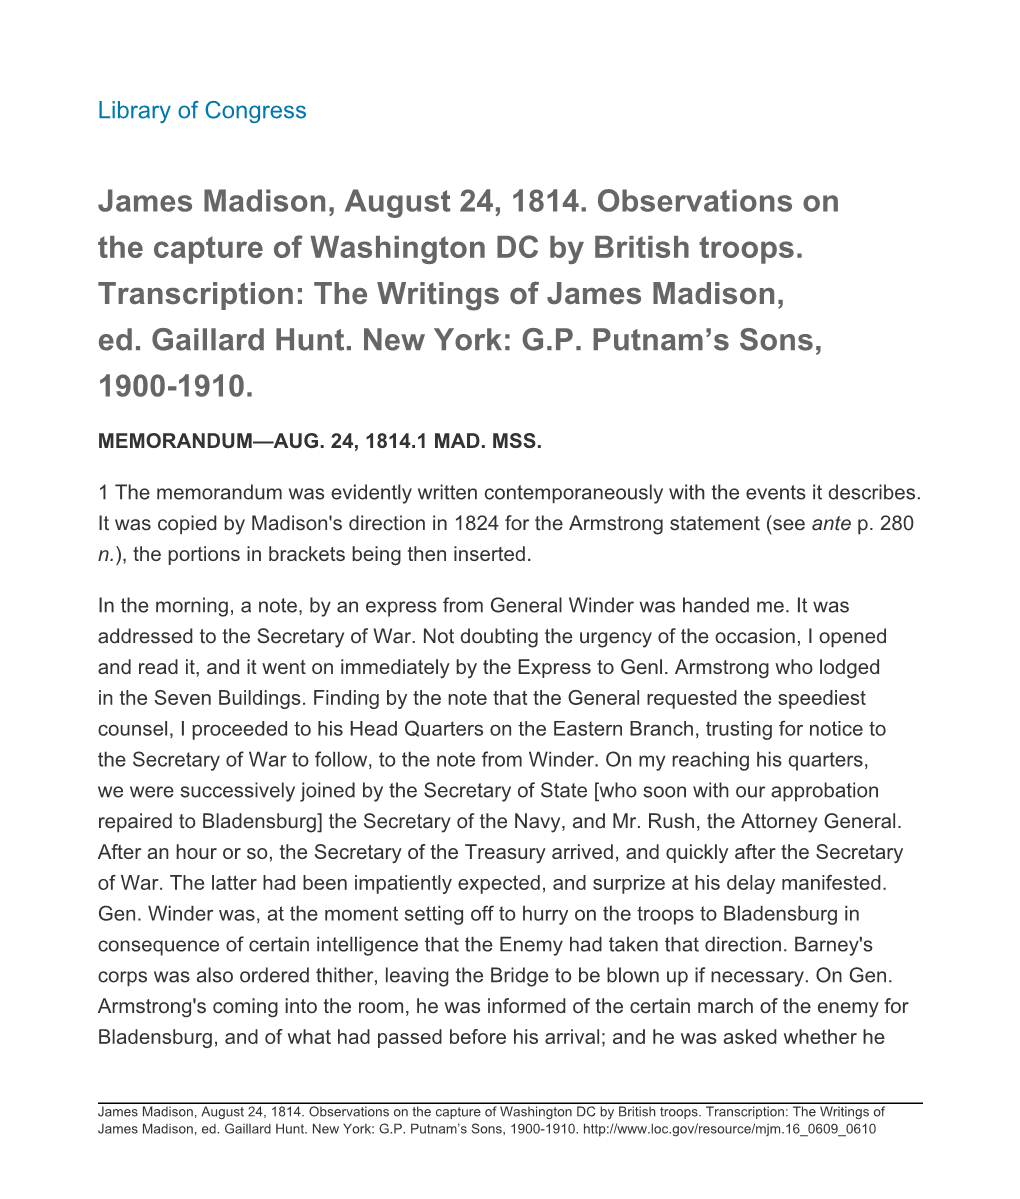 James Madison, August 24, 1814. Observations on the Capture of Washington DC by British Troops